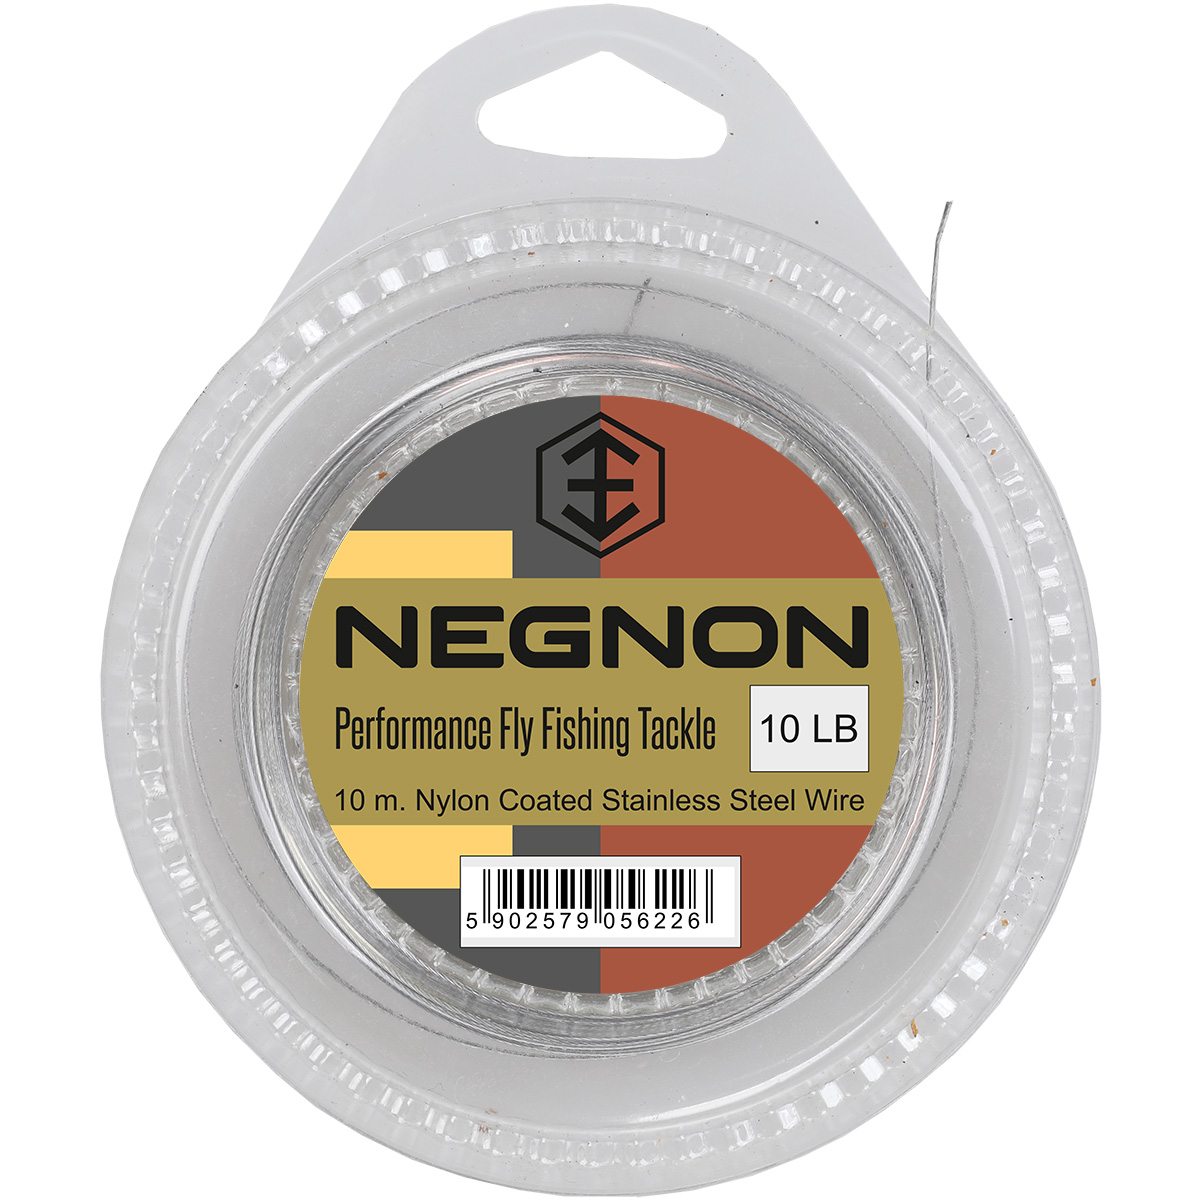 Negnon Nylon Coated Stainless Steel Wire